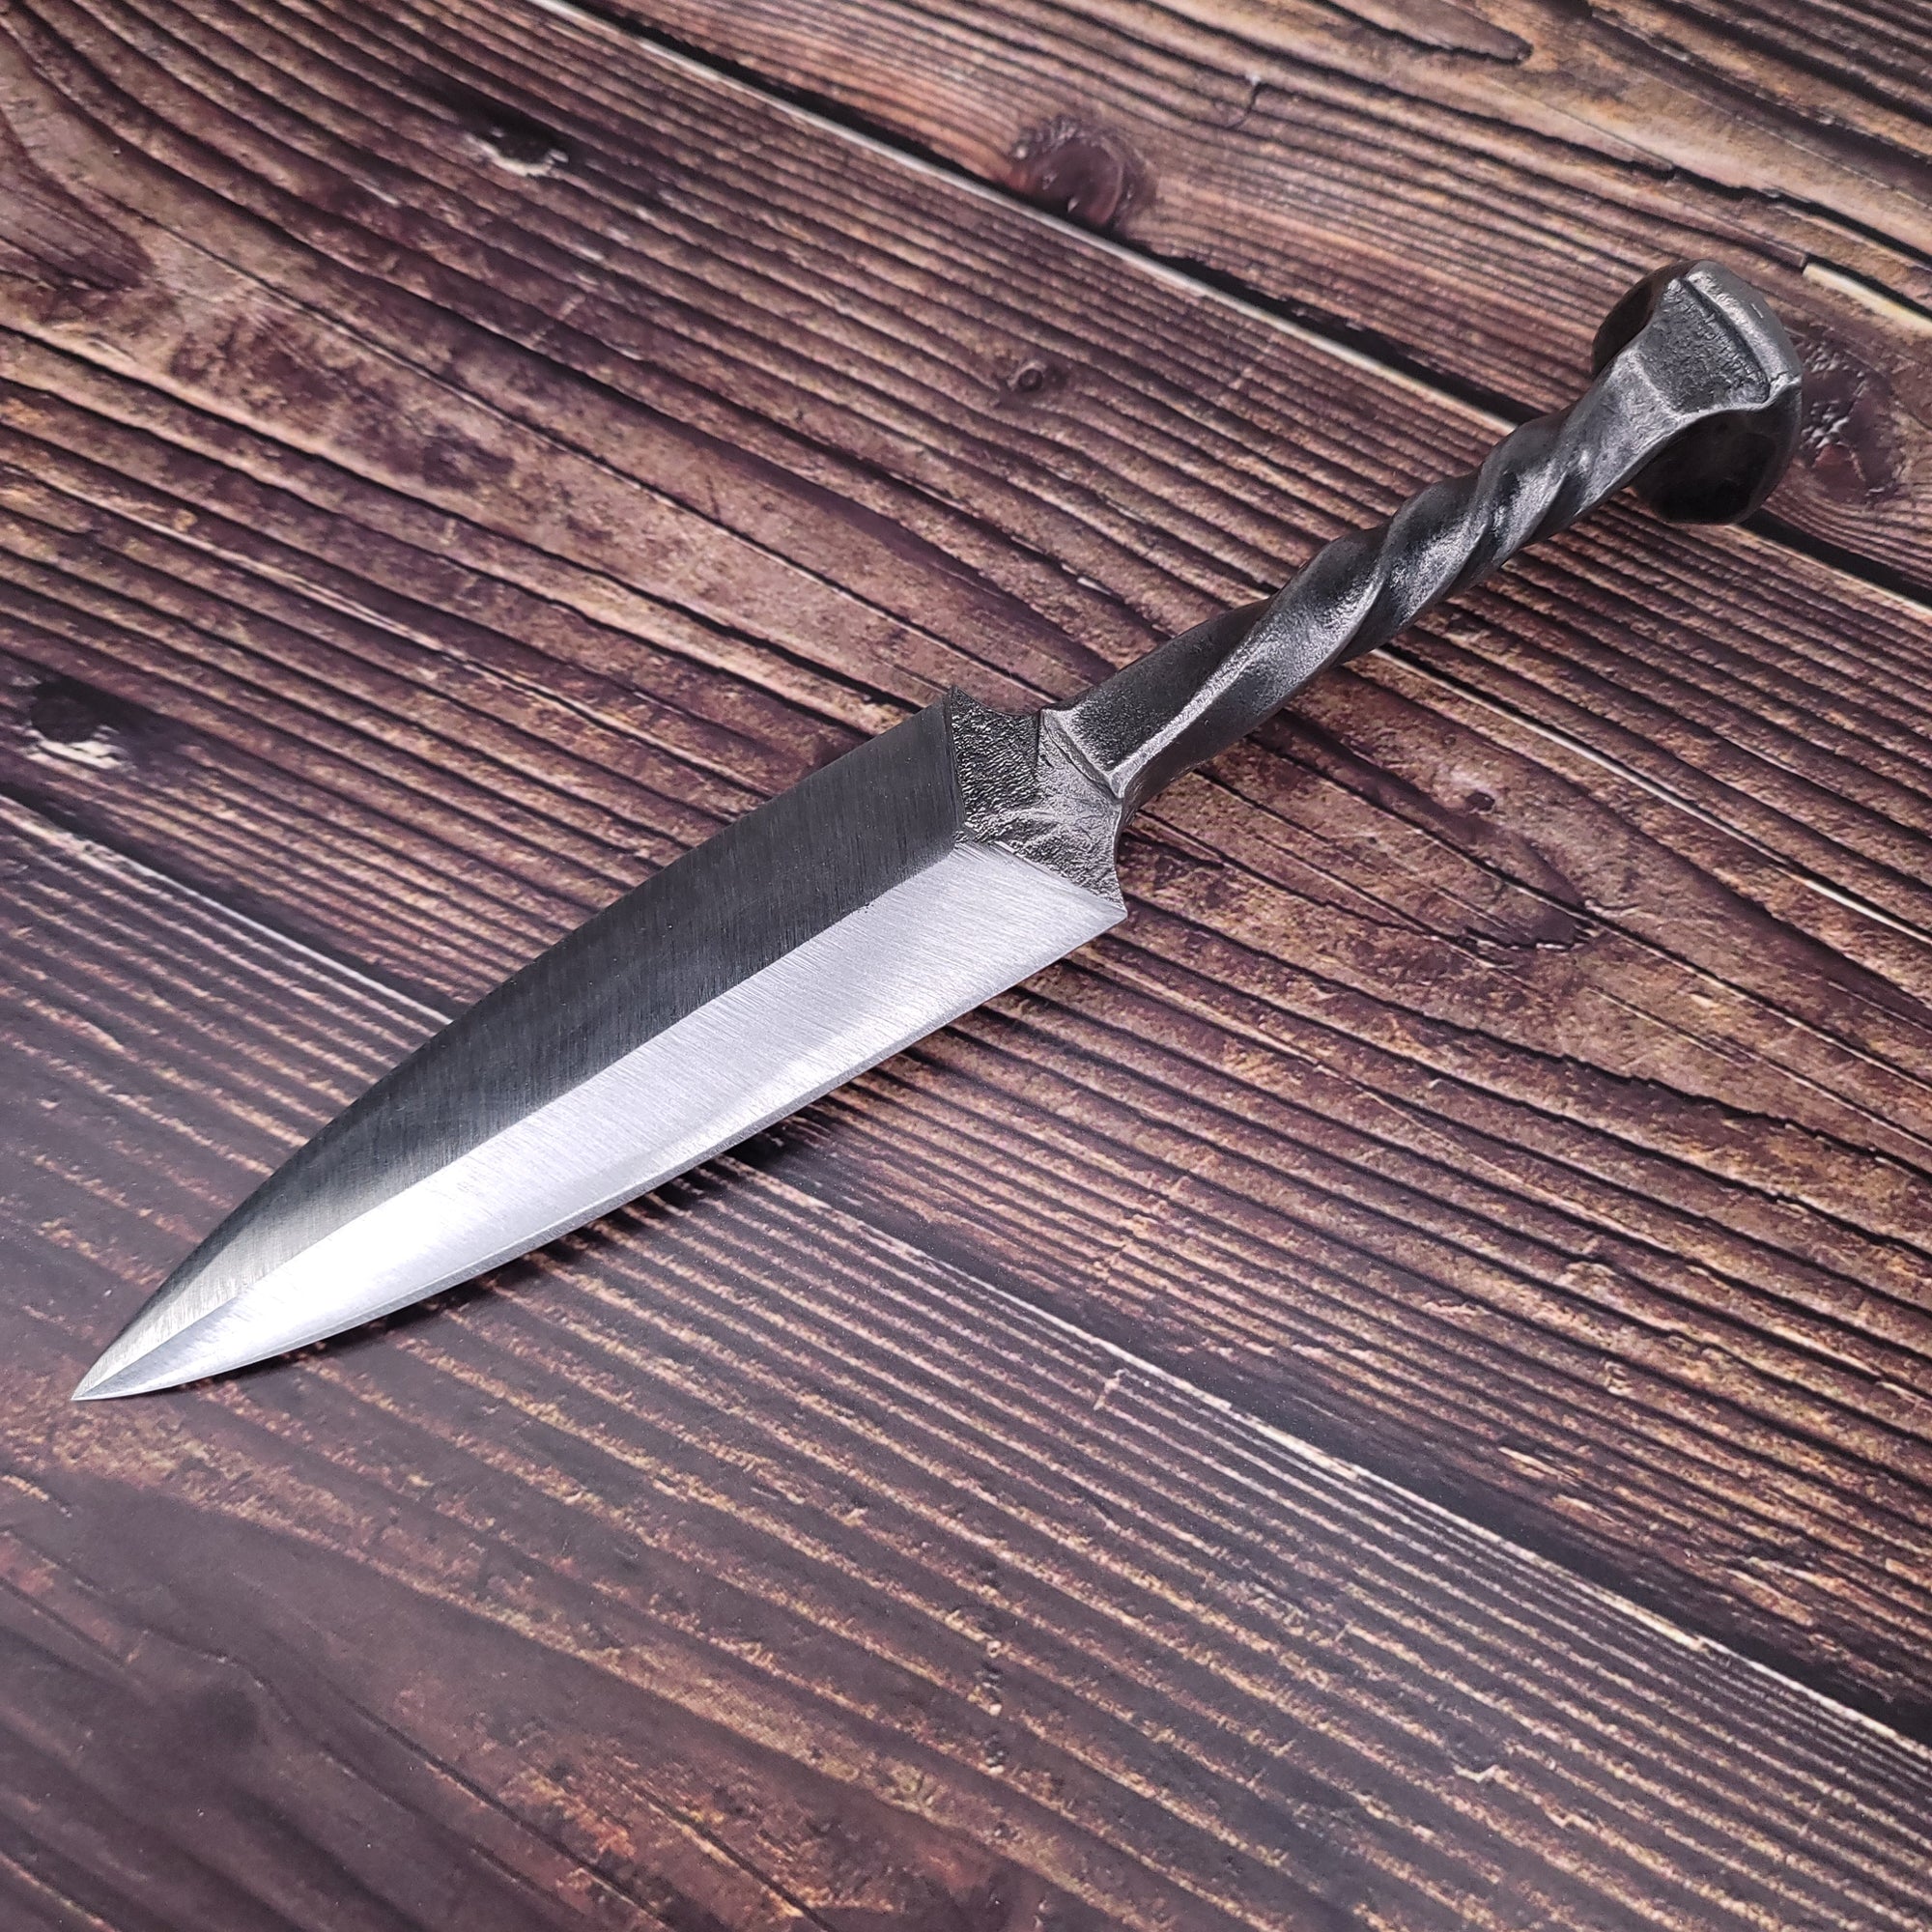 Silver Moon Athame - Moon Water Ceremonial Dagger Forged from a Reclaimed Railway Spike